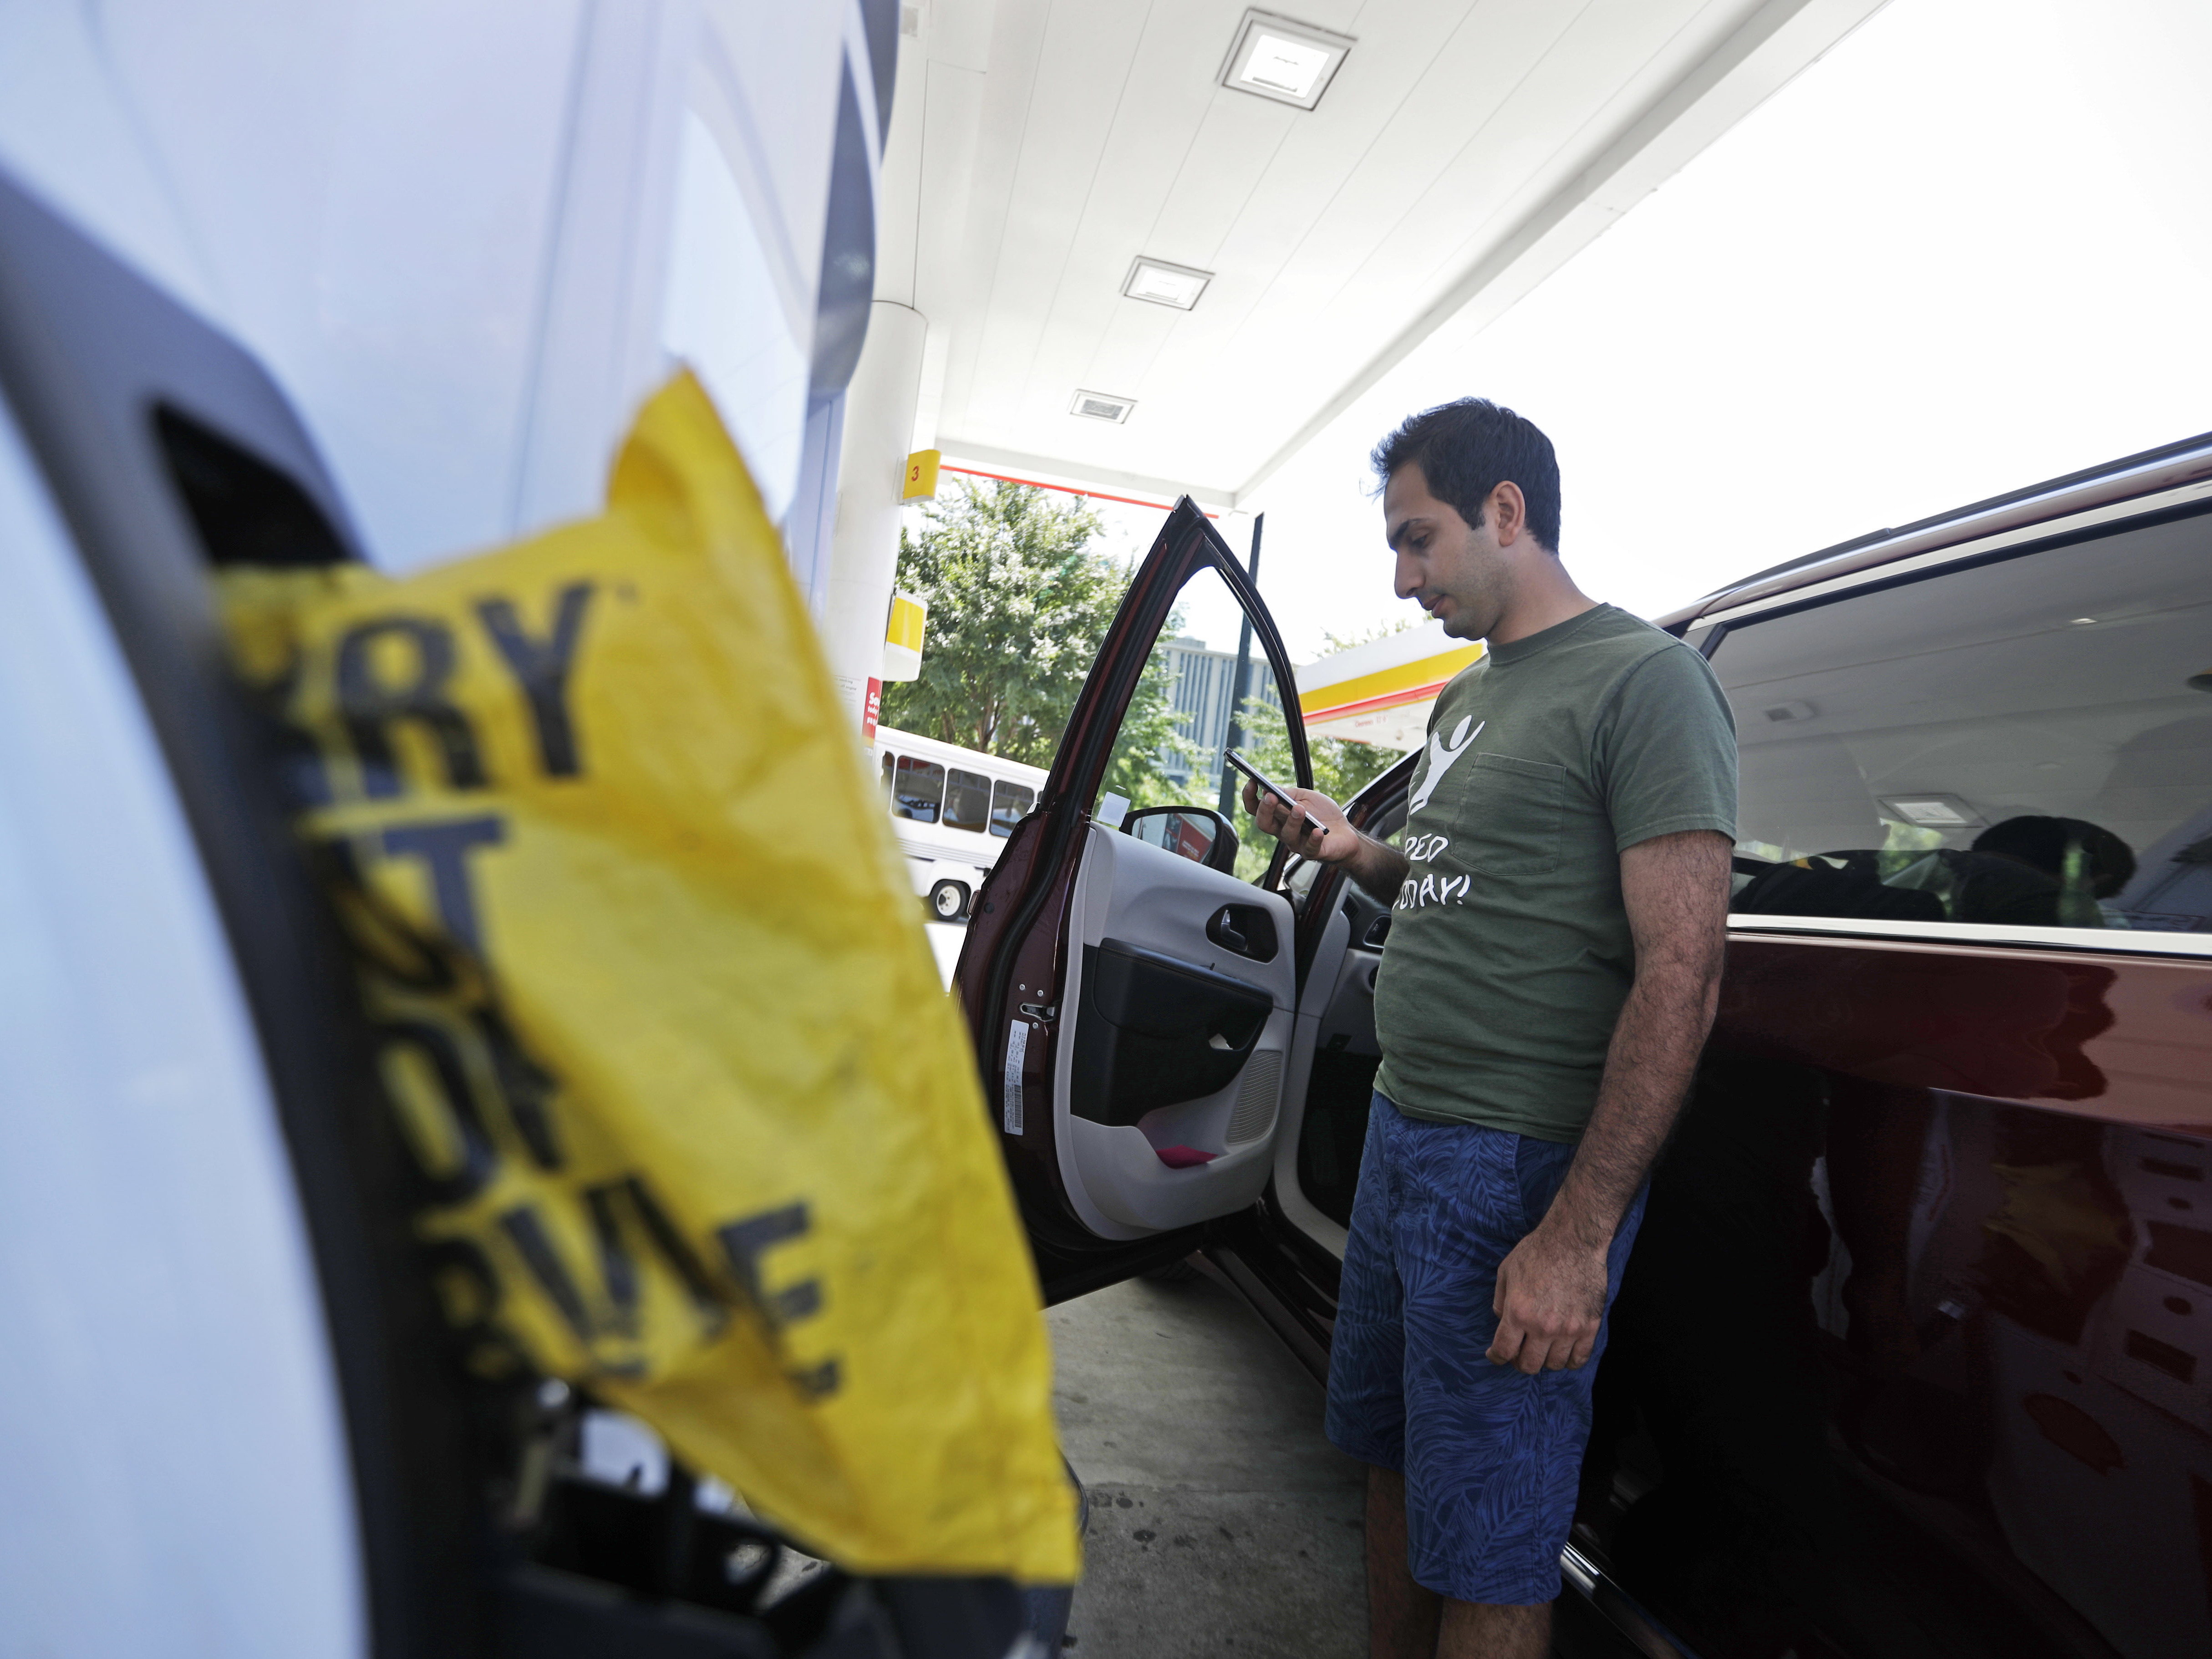 A motorist who found an Atlanta gas station had run out of fuel calls a nearby gas station Monday to see if they have any left. Gas prices spiked and drivers found "out of service" bags covering pumps as the gas shortage in the South rolled into the work week, raising fears that the disruptions could become more widespread. (Photo by David Goldman/Associated Press)